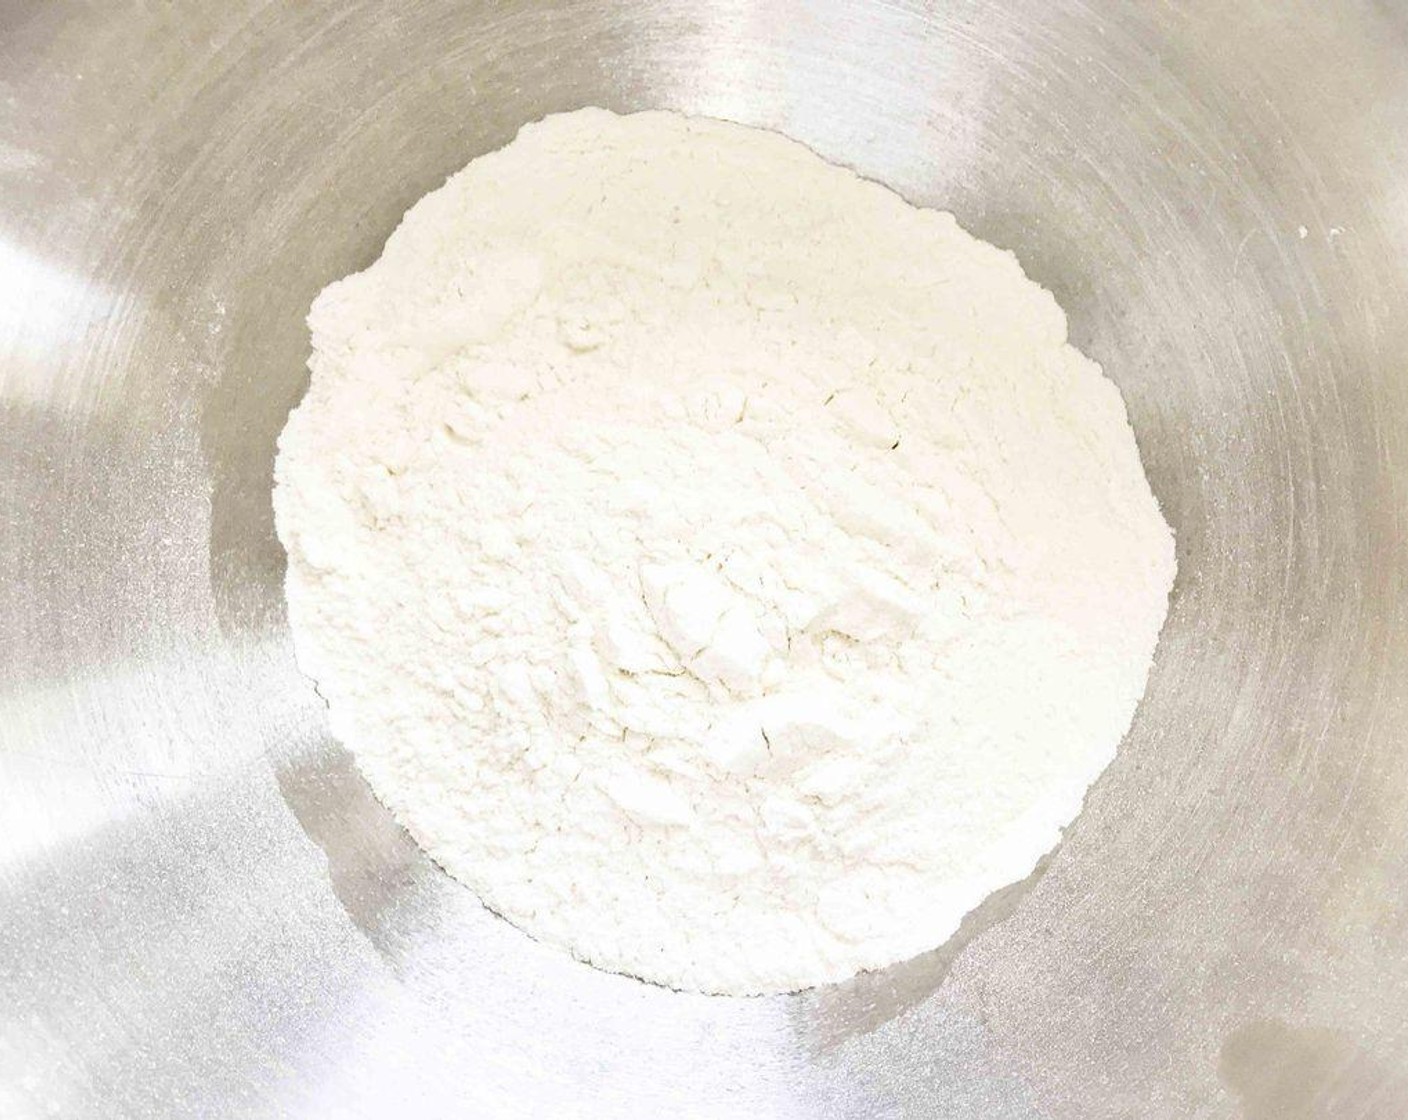 step 2 In a medium bowl, whisk together the All-Purpose Flour (1 2/3 cups), Baking Powder (1/2 tsp), Baking Soda (1/2 tsp), and Sea Salt (1/2 tsp).